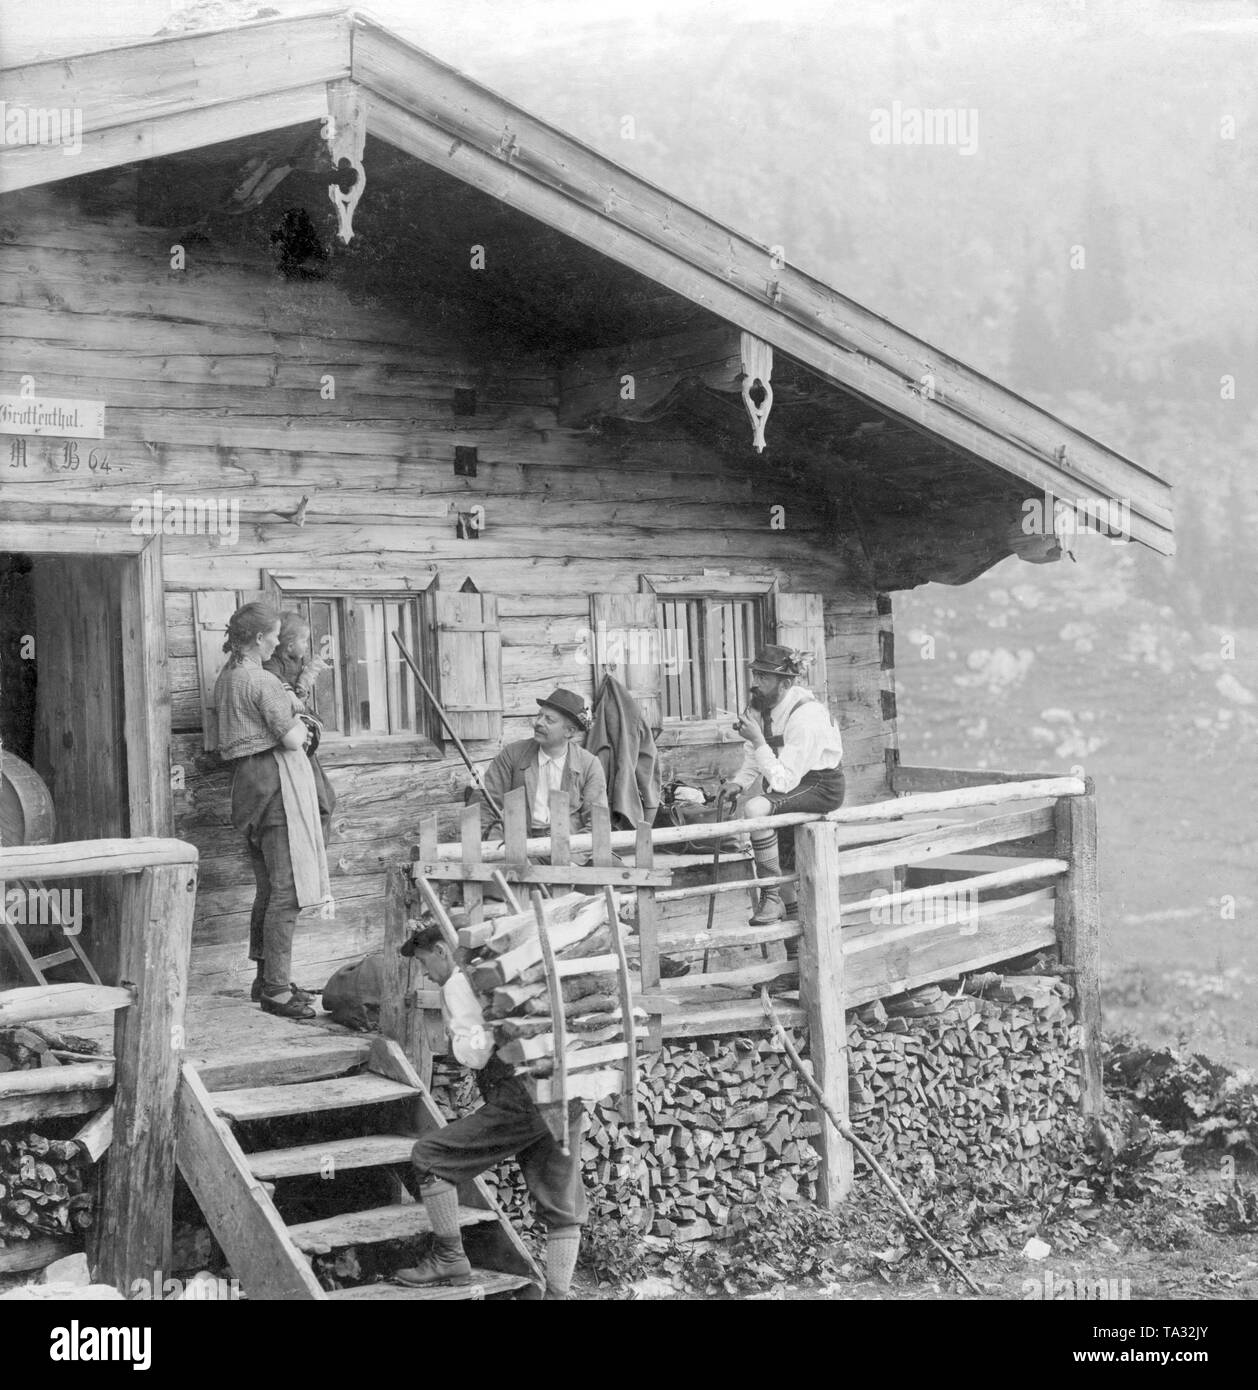 The dairymaid (left) with her child in her arms greets the first two 'seasonal guests' (right) on an alpine pasture in Upper Bavaria. In the foreground, a helper of the dairymaid carries wood for the stove into the house on his back. Stock Photo